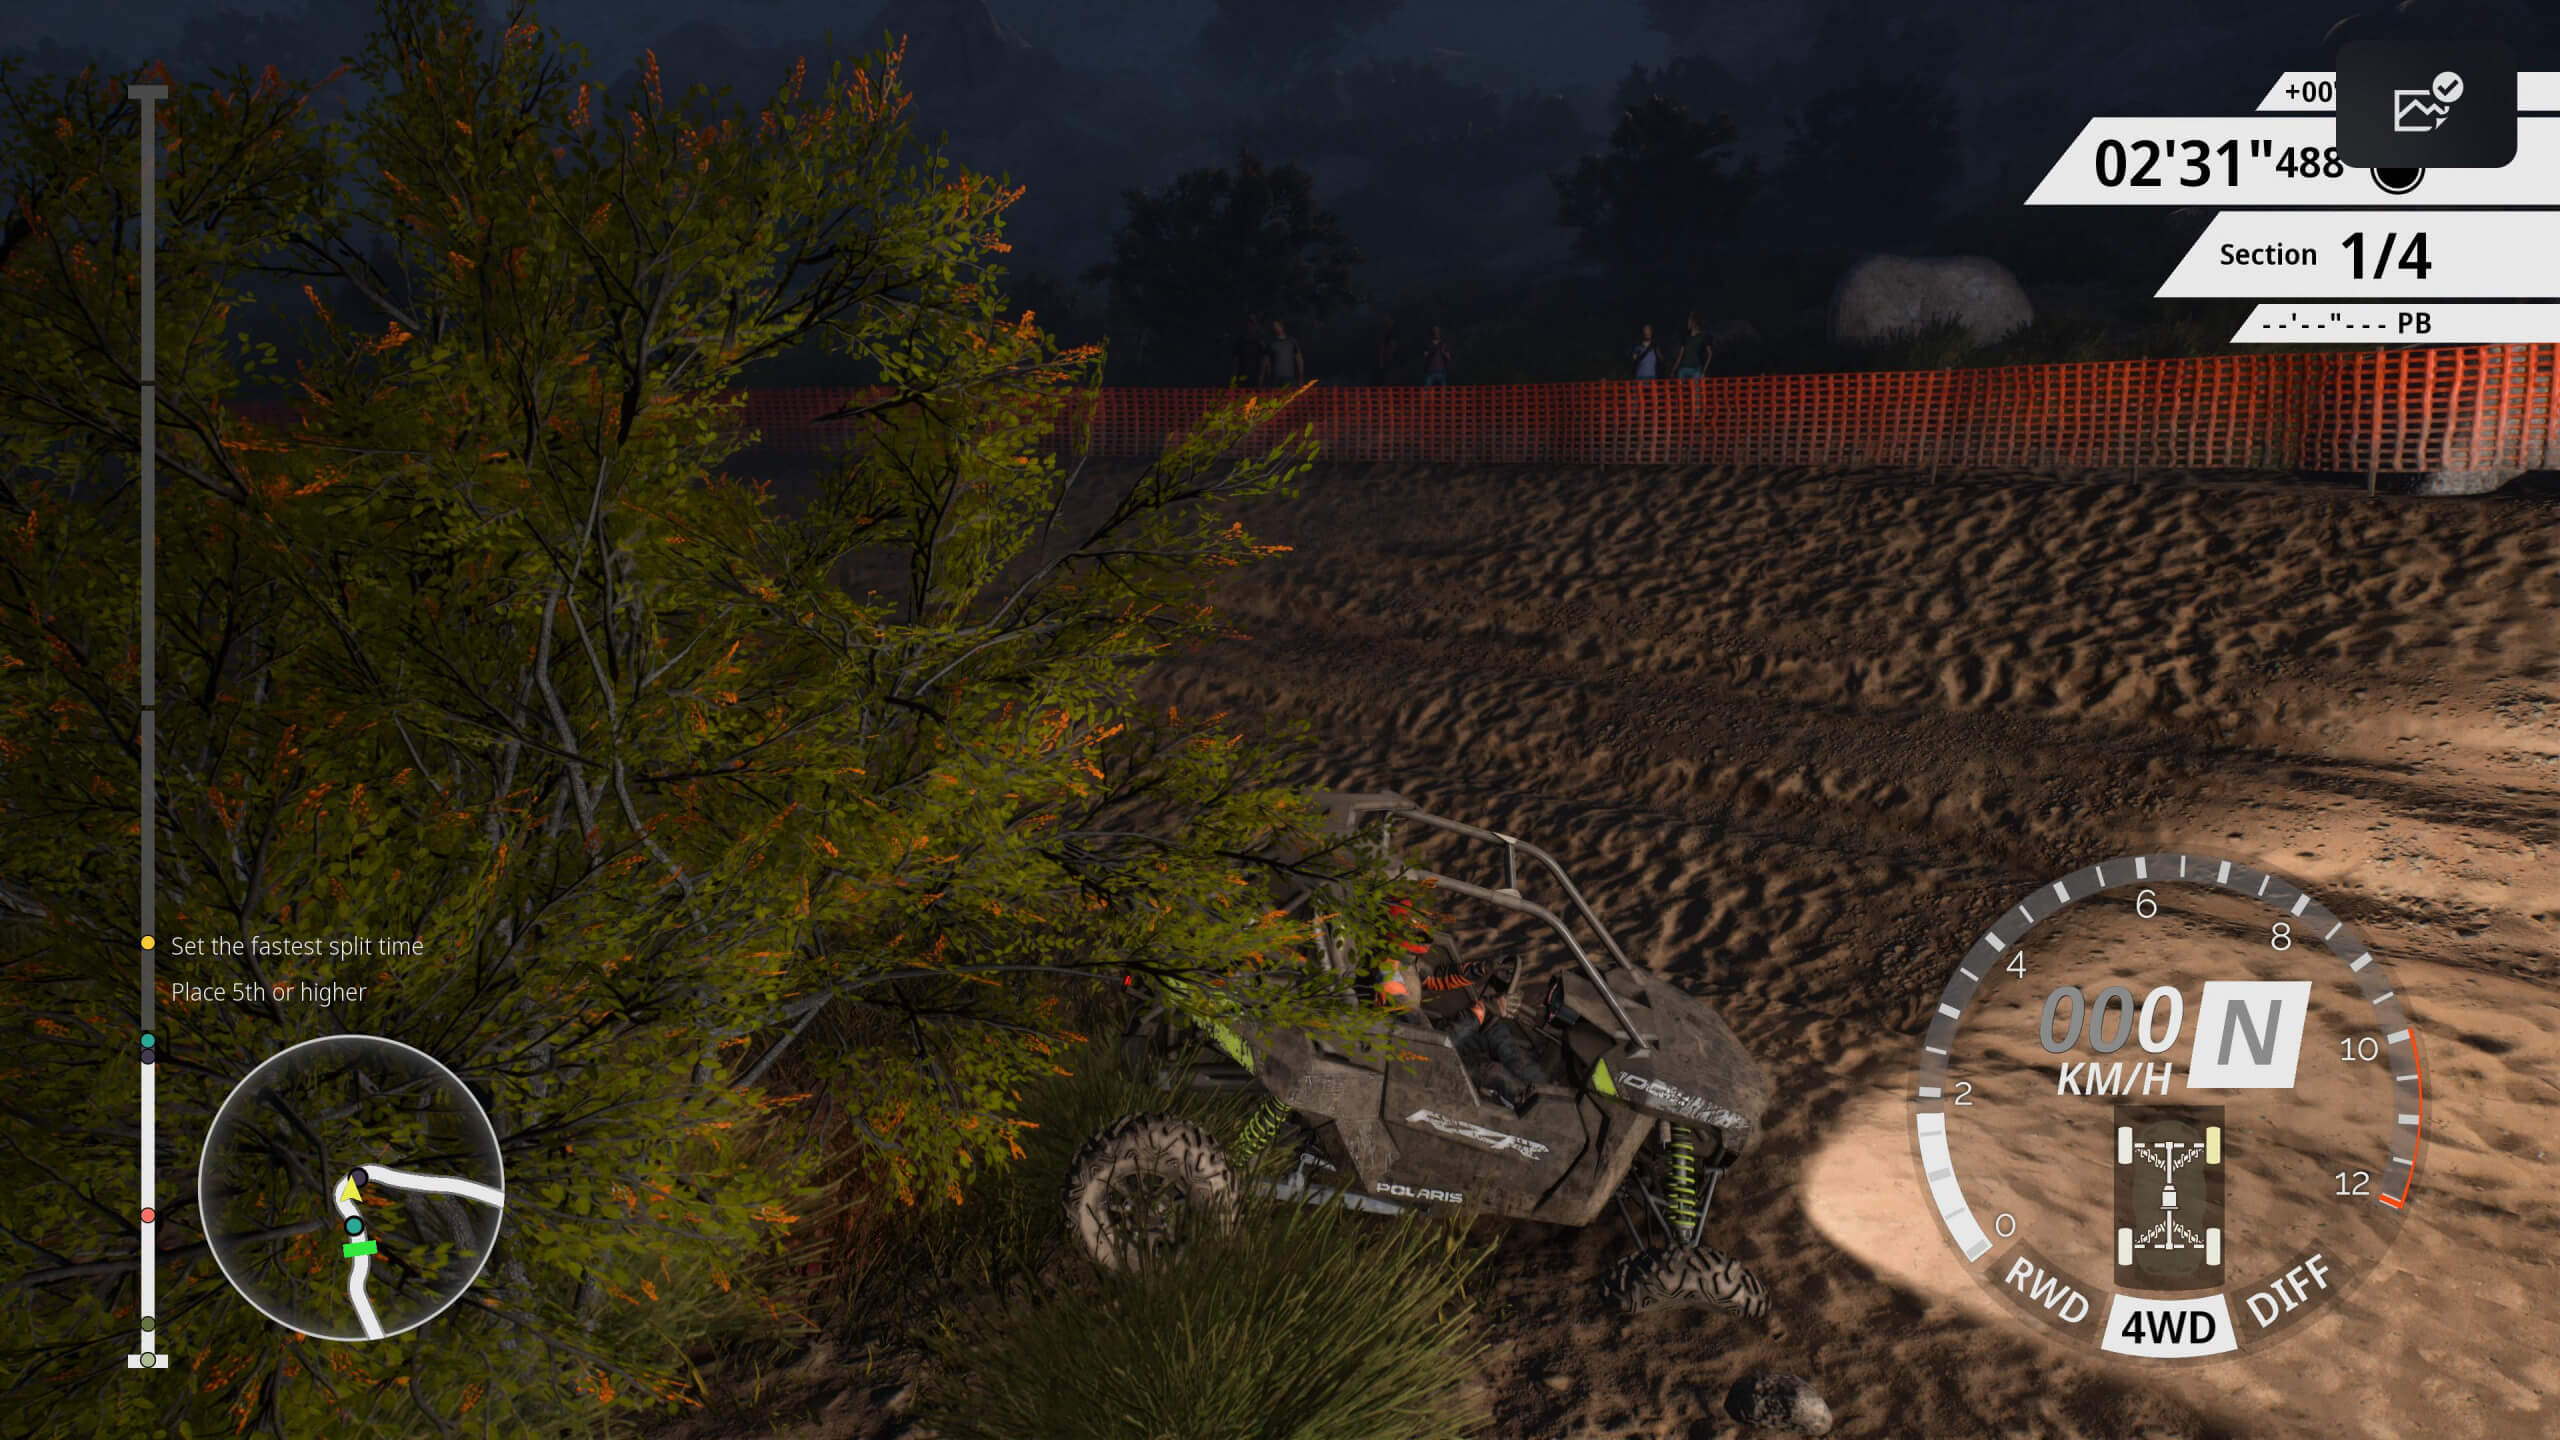 A player experiences an in game bug showing the wheel beneath the track